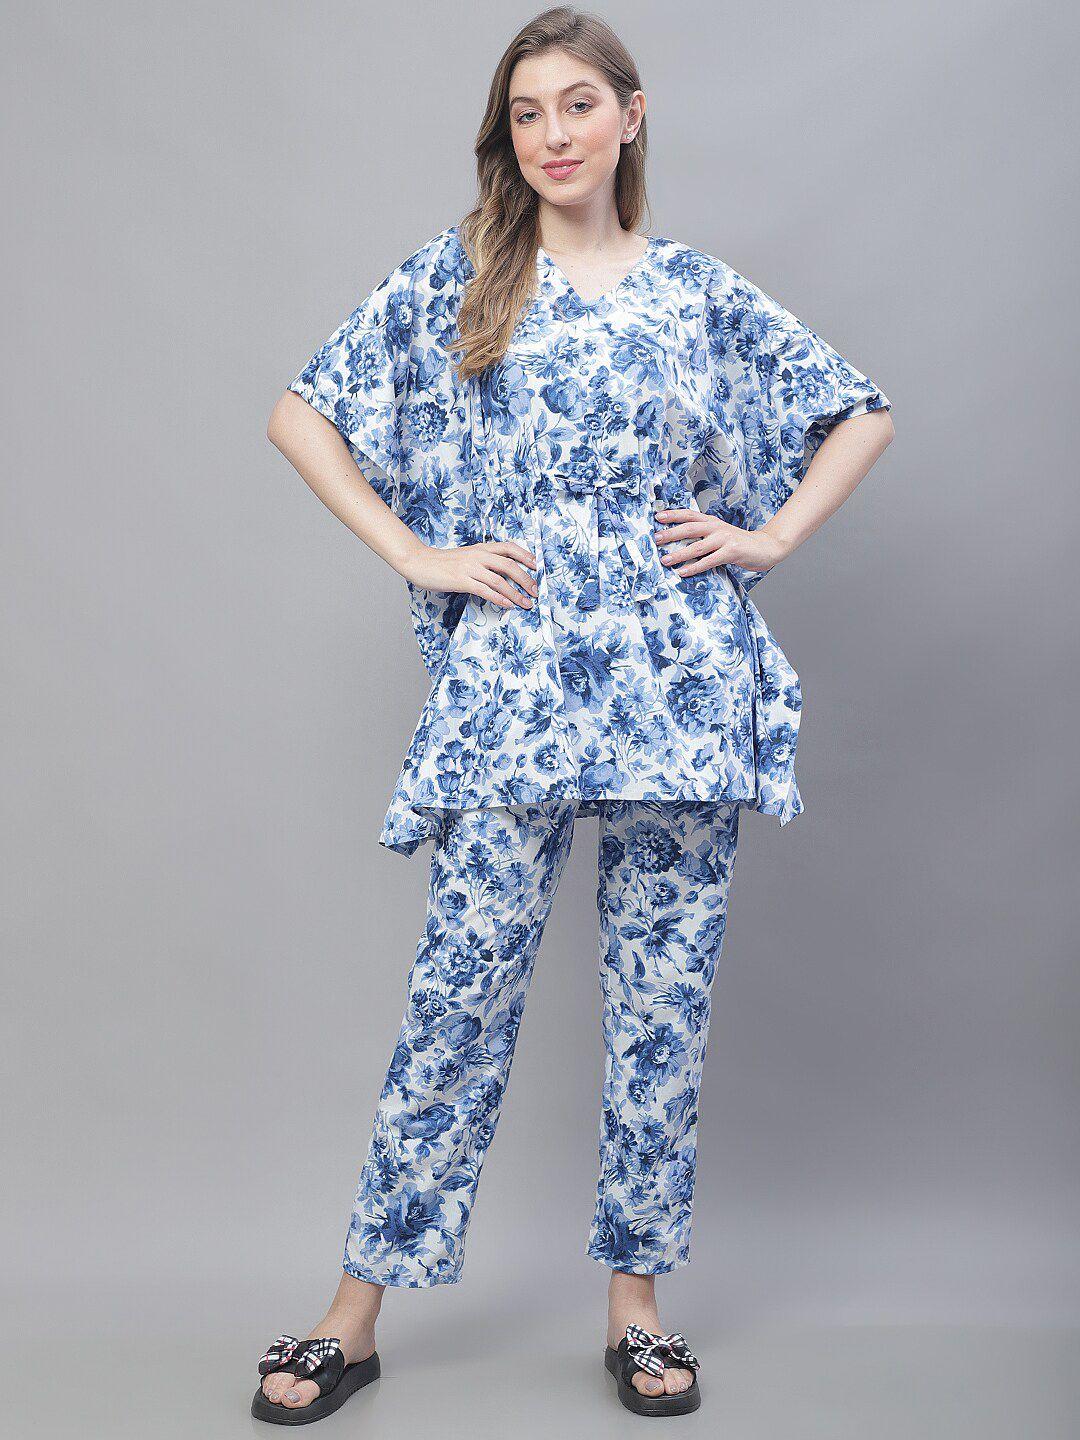 tag 7 floral printed pure cotton kaftan night suit